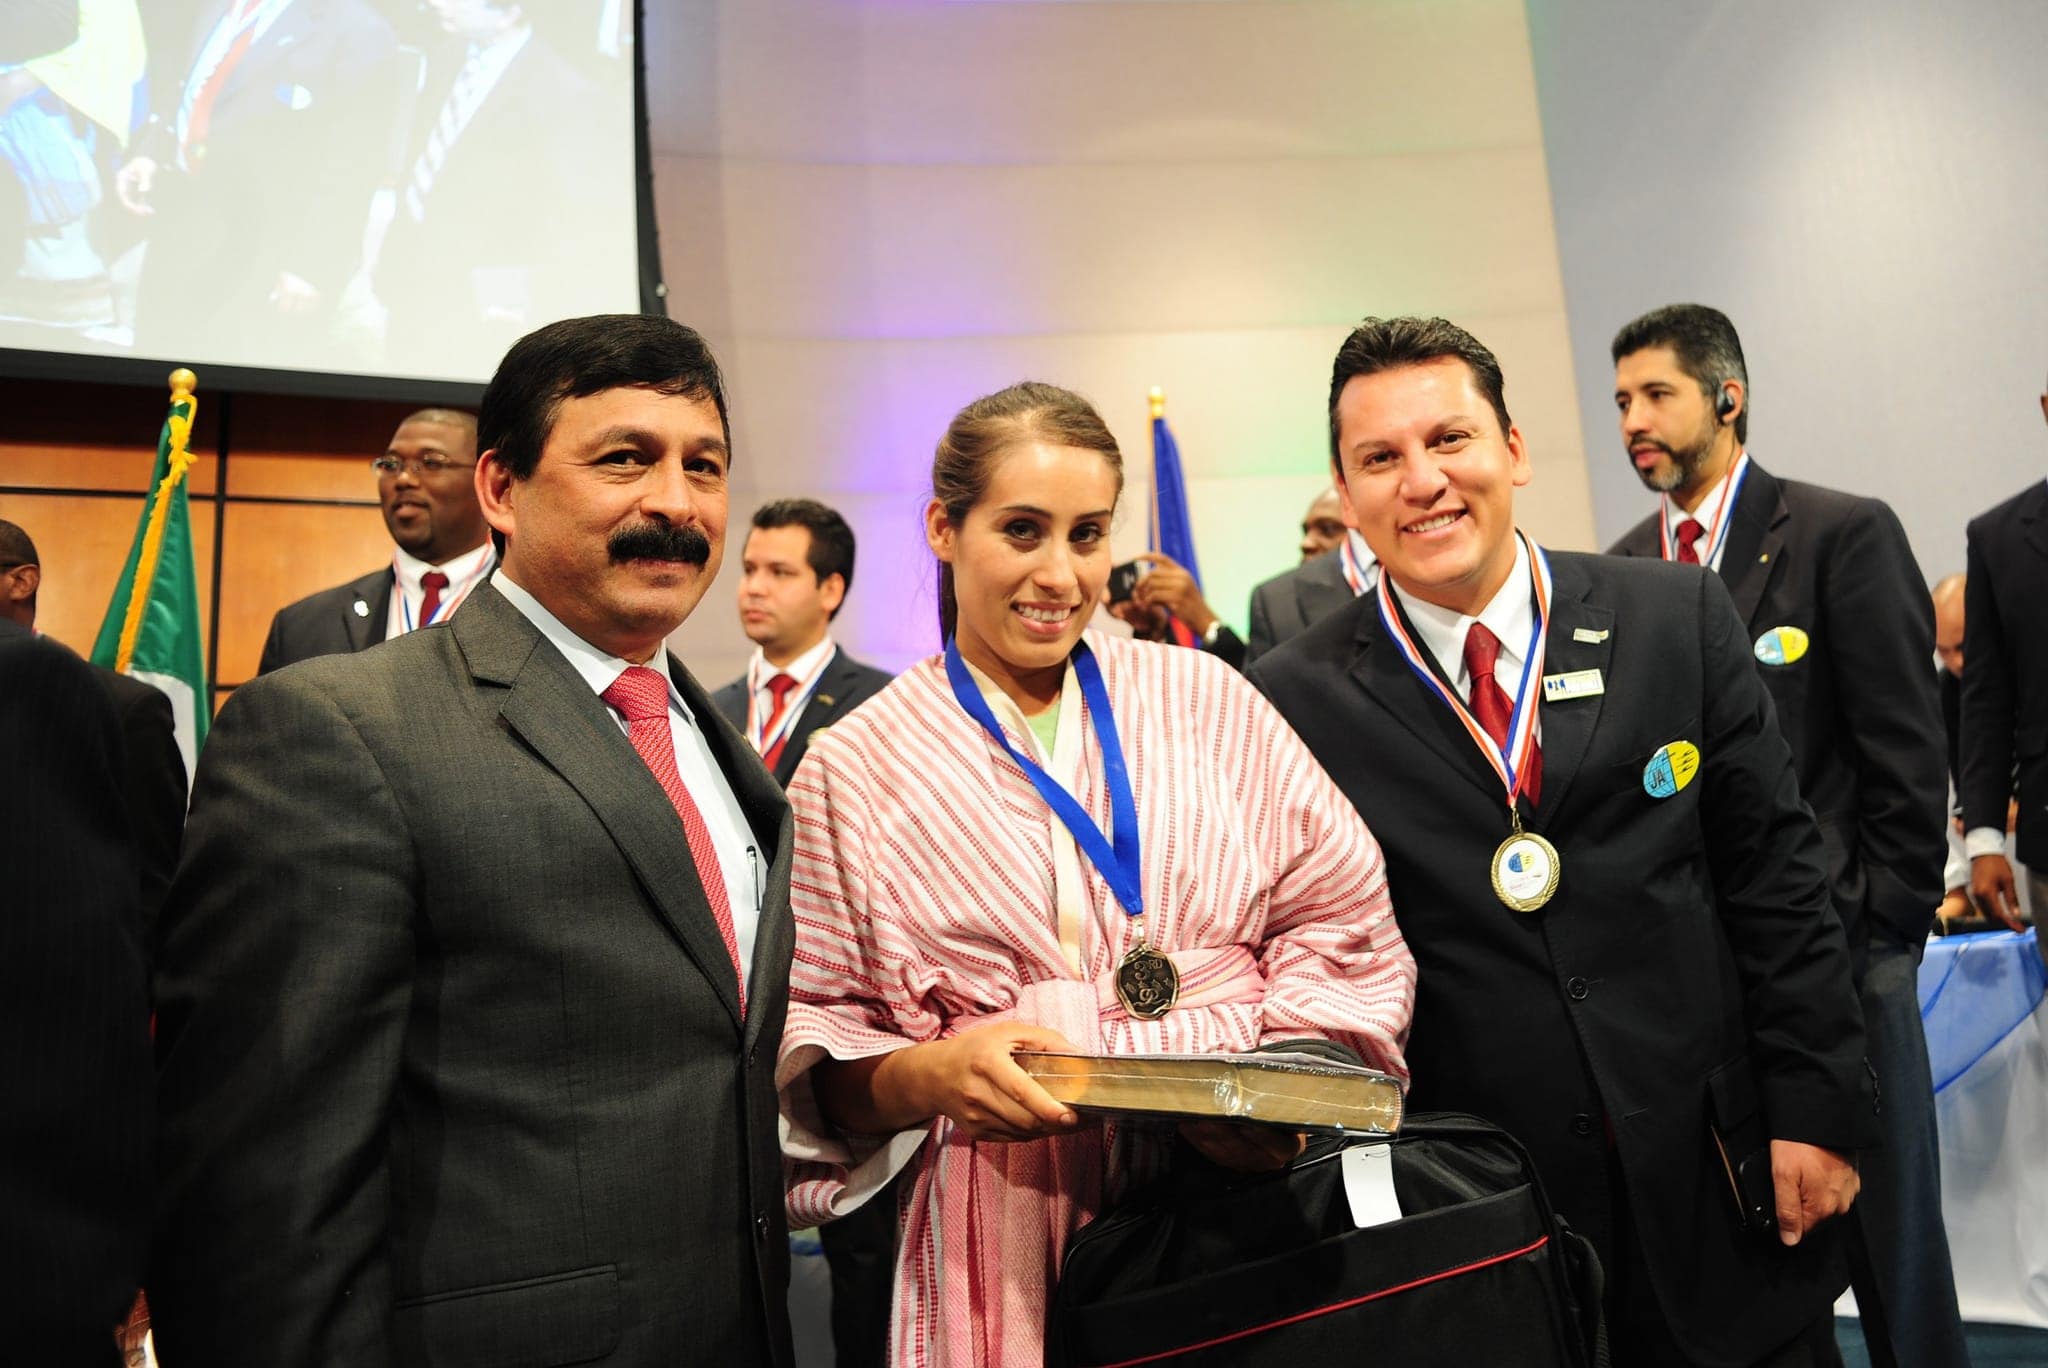 Third-place winner Miriam Orozco, a nursing student from Mexico, reviewed the books of the Bible for her daily devotionals.